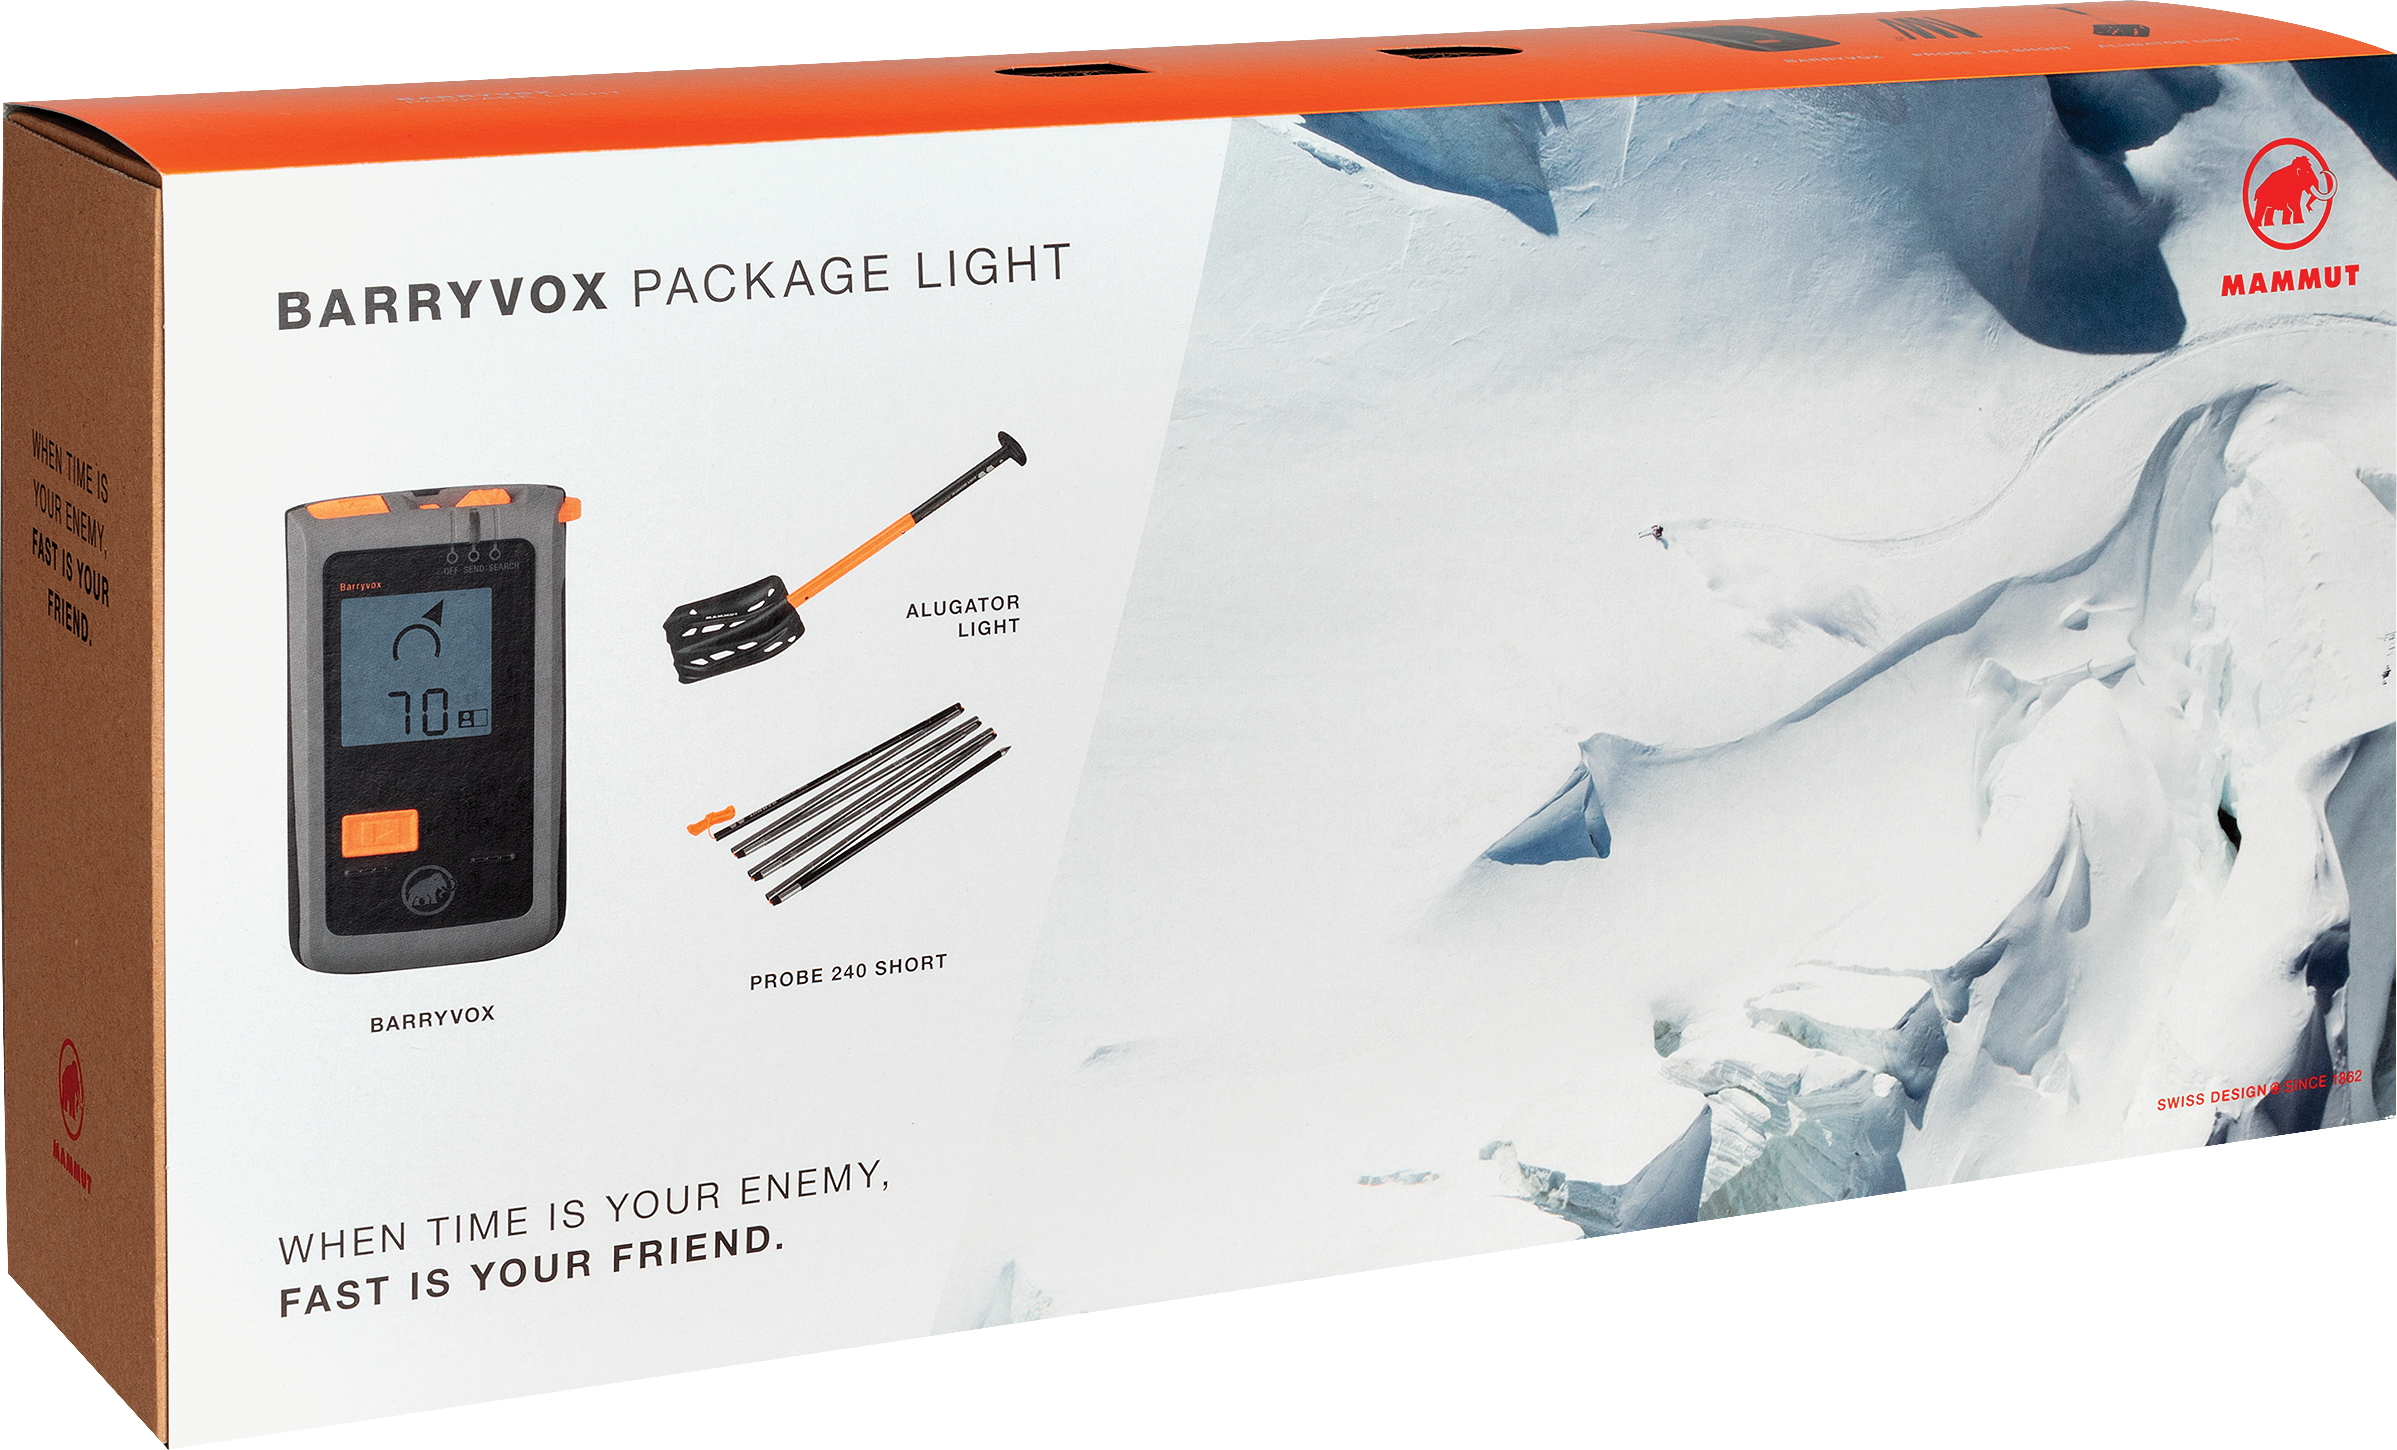 Barryvox Package Light